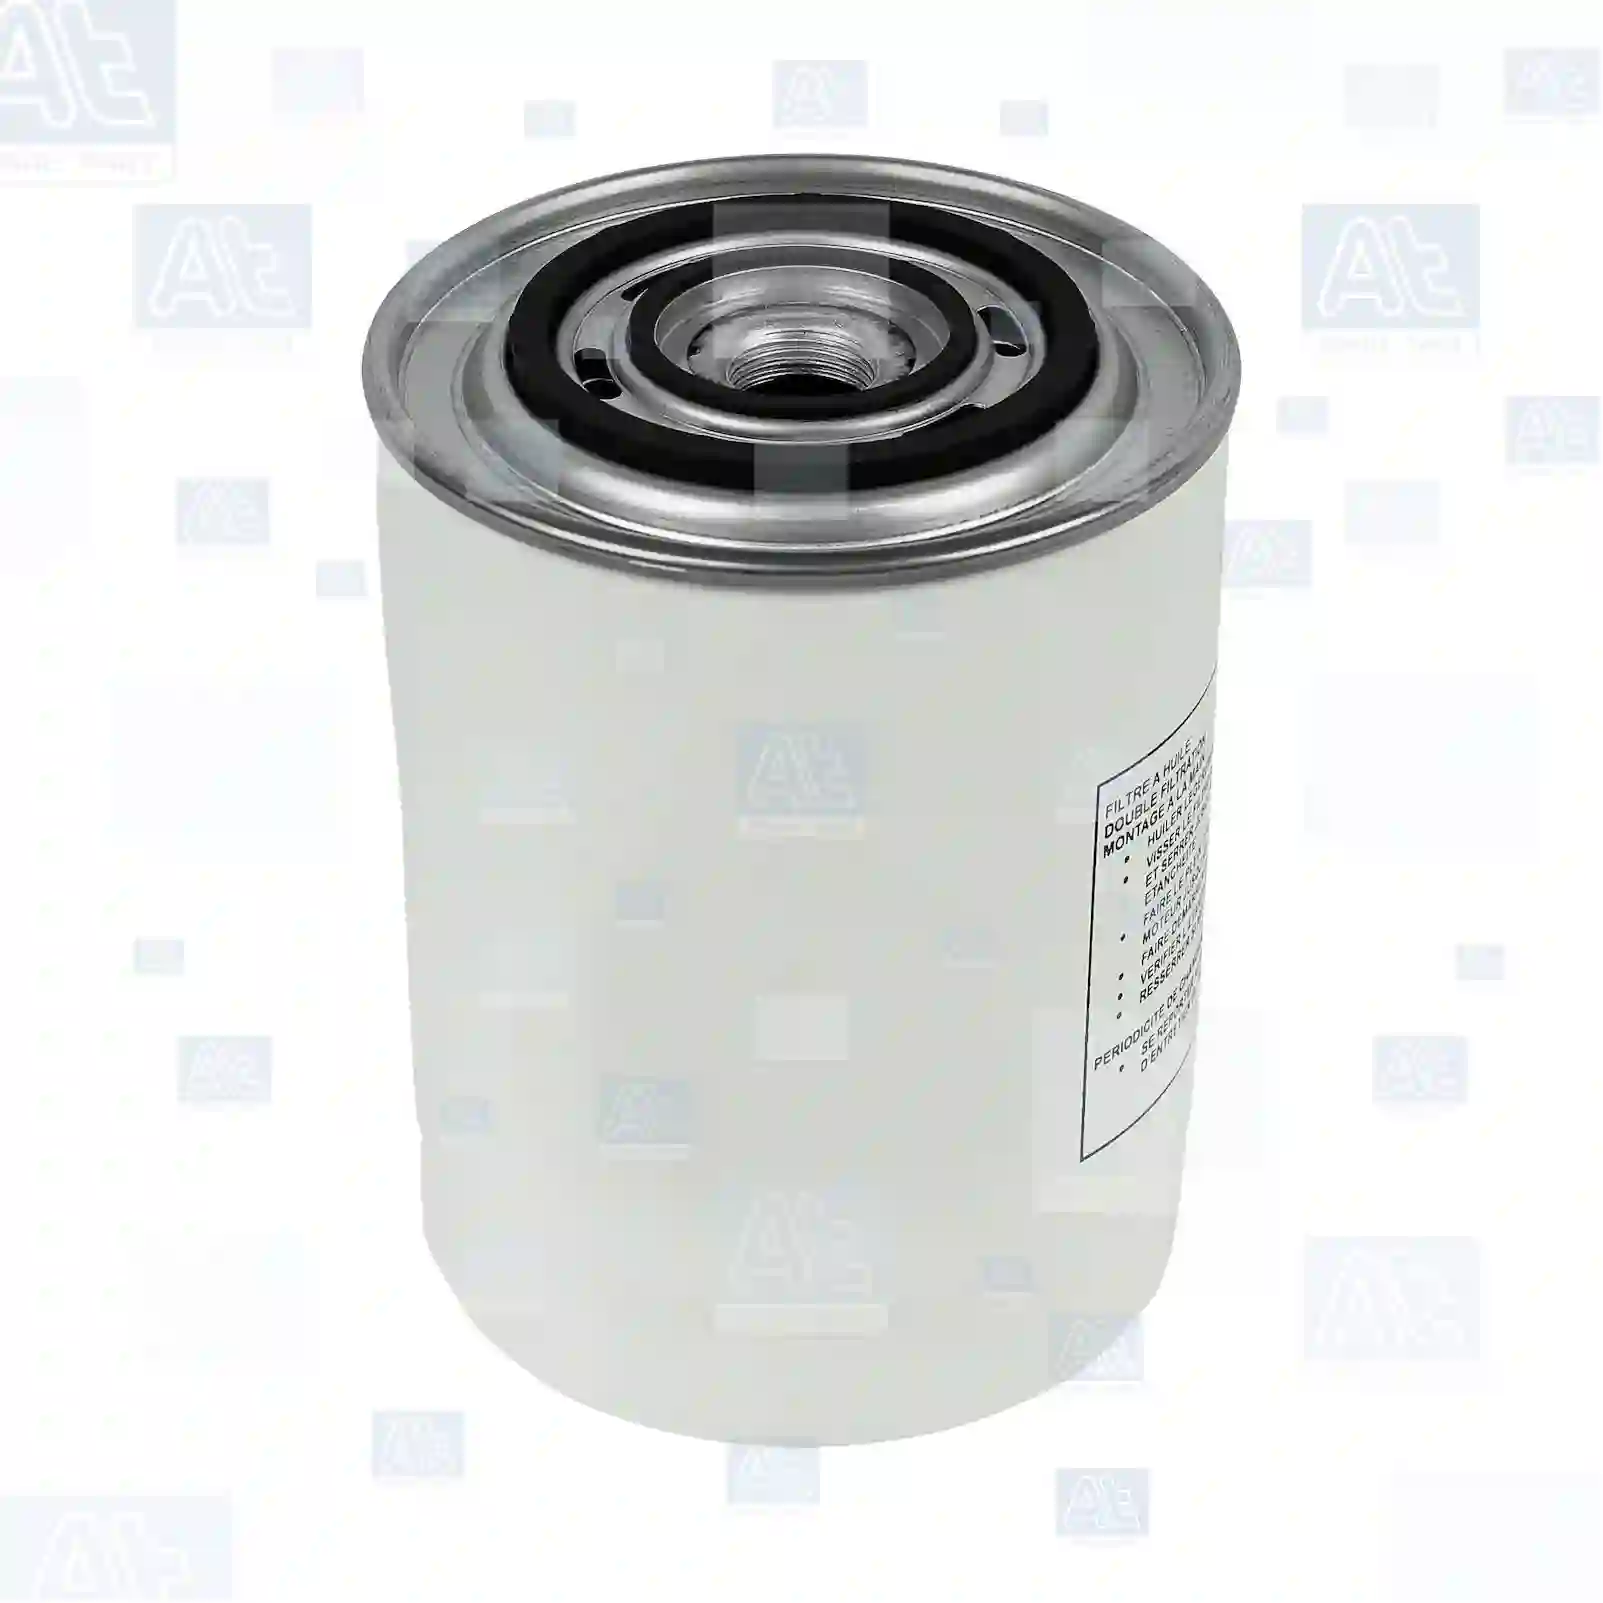 Oil filter, at no 77700870, oem no: 1931047, LF0348100, 9110665, 1109AQ, 1109J3, 1109P5, 1109P6, 1109Q0, 1109Q1, 1109Q4, 1109Y7, 1109Y8, 01831118, 01900823, 01902047, 01902076, 01902847, 01903628, 01903785, 01907580, 01907582, 01907583, 01930213, 01930823, 01931047, 04787410, 04791113, 05983900, 07301916, 07301939, 07571569, 1902047, 71713782, 71718765, 71734217, 71736163, 71739633, 71739634, 71753740, 71771361, 71930213, 74787410, 74791113, 77301939, 98432648, 98432651, 98472349, 5025089, 5025091, 9110665, 9110665, L01930213, 01303628, 01900823, 01902047, 01902076, 01902847, 01903628, 01903784, 01903785, 01907580, 01907582, 01907583, 01930213, 01930823, 02994057, 04787410, 04791113, 04796458, 04799425, 05983900, 07301916, 07301939, 07571569, 11907580, 1902047, 1902076, 1902847, 1903628, 1907582, 1907583, 2994057, 500038747, 500322701, 5001857493, 98432648, 98472349, 04787410, 05983900, 07301916, 07571569, 71713782, 71718765, 71734217, 71736163, 71739633, 71739634, 71753740, 71771361, 98432648, 98432651, 01931047, LF0348100, 1109AQ, 1109J3, 1109P5, 1109P6, 1109Q0, 1109Q1, 1109Q4, 1109Y7, 1109Y8, 5000816070, 5010816070, 6005021225, 7701035650, 1931047, ZG01712-0008 At Spare Part | Engine, Accelerator Pedal, Camshaft, Connecting Rod, Crankcase, Crankshaft, Cylinder Head, Engine Suspension Mountings, Exhaust Manifold, Exhaust Gas Recirculation, Filter Kits, Flywheel Housing, General Overhaul Kits, Engine, Intake Manifold, Oil Cleaner, Oil Cooler, Oil Filter, Oil Pump, Oil Sump, Piston & Liner, Sensor & Switch, Timing Case, Turbocharger, Cooling System, Belt Tensioner, Coolant Filter, Coolant Pipe, Corrosion Prevention Agent, Drive, Expansion Tank, Fan, Intercooler, Monitors & Gauges, Radiator, Thermostat, V-Belt / Timing belt, Water Pump, Fuel System, Electronical Injector Unit, Feed Pump, Fuel Filter, cpl., Fuel Gauge Sender,  Fuel Line, Fuel Pump, Fuel Tank, Injection Line Kit, Injection Pump, Exhaust System, Clutch & Pedal, Gearbox, Propeller Shaft, Axles, Brake System, Hubs & Wheels, Suspension, Leaf Spring, Universal Parts / Accessories, Steering, Electrical System, Cabin Oil filter, at no 77700870, oem no: 1931047, LF0348100, 9110665, 1109AQ, 1109J3, 1109P5, 1109P6, 1109Q0, 1109Q1, 1109Q4, 1109Y7, 1109Y8, 01831118, 01900823, 01902047, 01902076, 01902847, 01903628, 01903785, 01907580, 01907582, 01907583, 01930213, 01930823, 01931047, 04787410, 04791113, 05983900, 07301916, 07301939, 07571569, 1902047, 71713782, 71718765, 71734217, 71736163, 71739633, 71739634, 71753740, 71771361, 71930213, 74787410, 74791113, 77301939, 98432648, 98432651, 98472349, 5025089, 5025091, 9110665, 9110665, L01930213, 01303628, 01900823, 01902047, 01902076, 01902847, 01903628, 01903784, 01903785, 01907580, 01907582, 01907583, 01930213, 01930823, 02994057, 04787410, 04791113, 04796458, 04799425, 05983900, 07301916, 07301939, 07571569, 11907580, 1902047, 1902076, 1902847, 1903628, 1907582, 1907583, 2994057, 500038747, 500322701, 5001857493, 98432648, 98472349, 04787410, 05983900, 07301916, 07571569, 71713782, 71718765, 71734217, 71736163, 71739633, 71739634, 71753740, 71771361, 98432648, 98432651, 01931047, LF0348100, 1109AQ, 1109J3, 1109P5, 1109P6, 1109Q0, 1109Q1, 1109Q4, 1109Y7, 1109Y8, 5000816070, 5010816070, 6005021225, 7701035650, 1931047, ZG01712-0008 At Spare Part | Engine, Accelerator Pedal, Camshaft, Connecting Rod, Crankcase, Crankshaft, Cylinder Head, Engine Suspension Mountings, Exhaust Manifold, Exhaust Gas Recirculation, Filter Kits, Flywheel Housing, General Overhaul Kits, Engine, Intake Manifold, Oil Cleaner, Oil Cooler, Oil Filter, Oil Pump, Oil Sump, Piston & Liner, Sensor & Switch, Timing Case, Turbocharger, Cooling System, Belt Tensioner, Coolant Filter, Coolant Pipe, Corrosion Prevention Agent, Drive, Expansion Tank, Fan, Intercooler, Monitors & Gauges, Radiator, Thermostat, V-Belt / Timing belt, Water Pump, Fuel System, Electronical Injector Unit, Feed Pump, Fuel Filter, cpl., Fuel Gauge Sender,  Fuel Line, Fuel Pump, Fuel Tank, Injection Line Kit, Injection Pump, Exhaust System, Clutch & Pedal, Gearbox, Propeller Shaft, Axles, Brake System, Hubs & Wheels, Suspension, Leaf Spring, Universal Parts / Accessories, Steering, Electrical System, Cabin